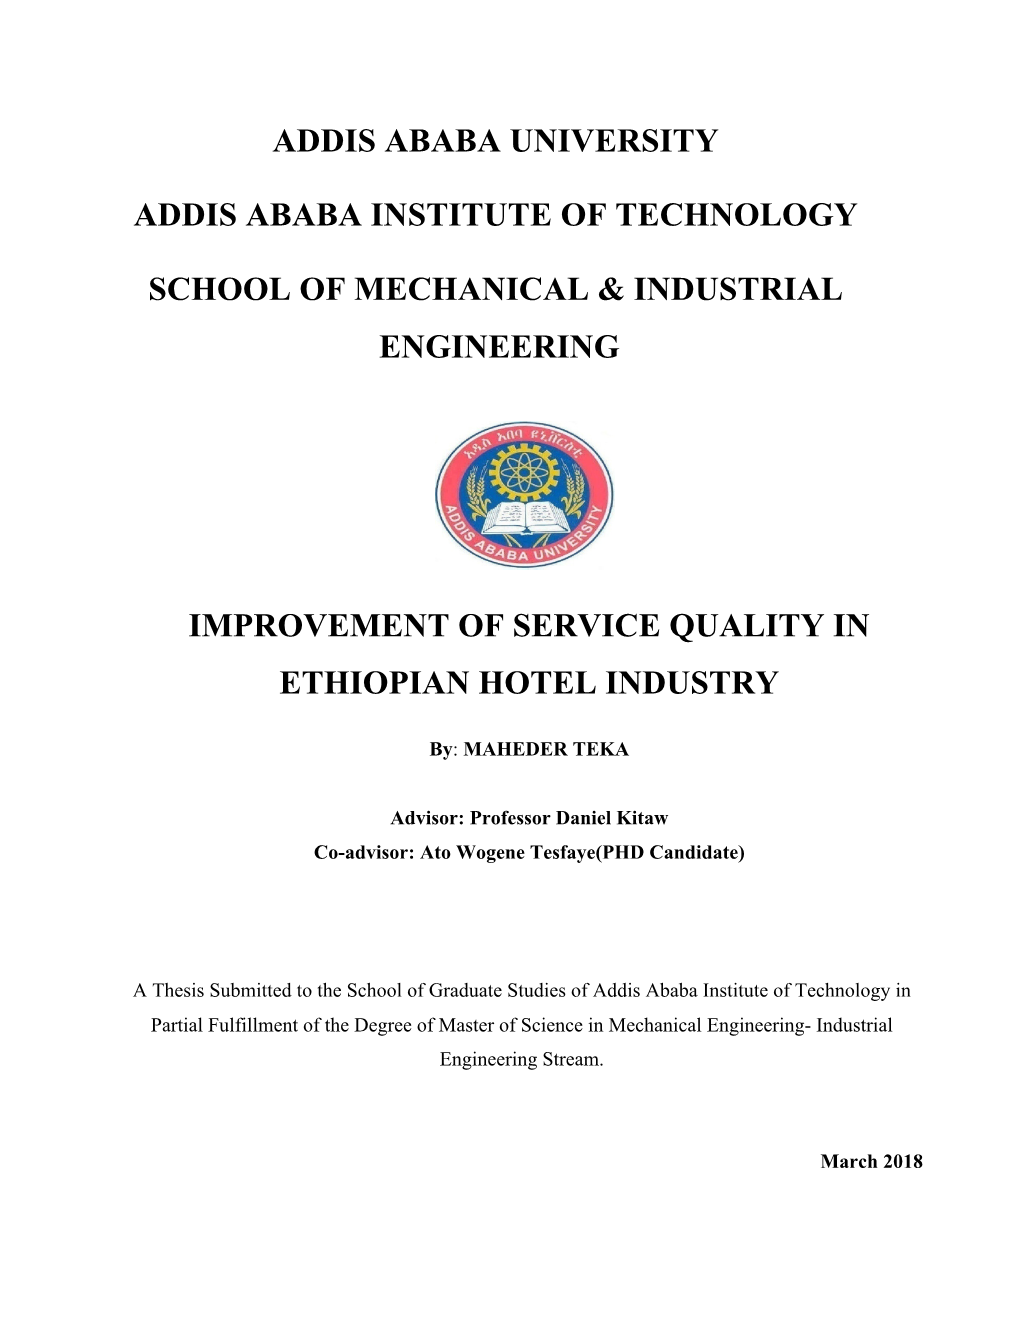 Improvement of Service Quality in Ethiopian Hotel Industry